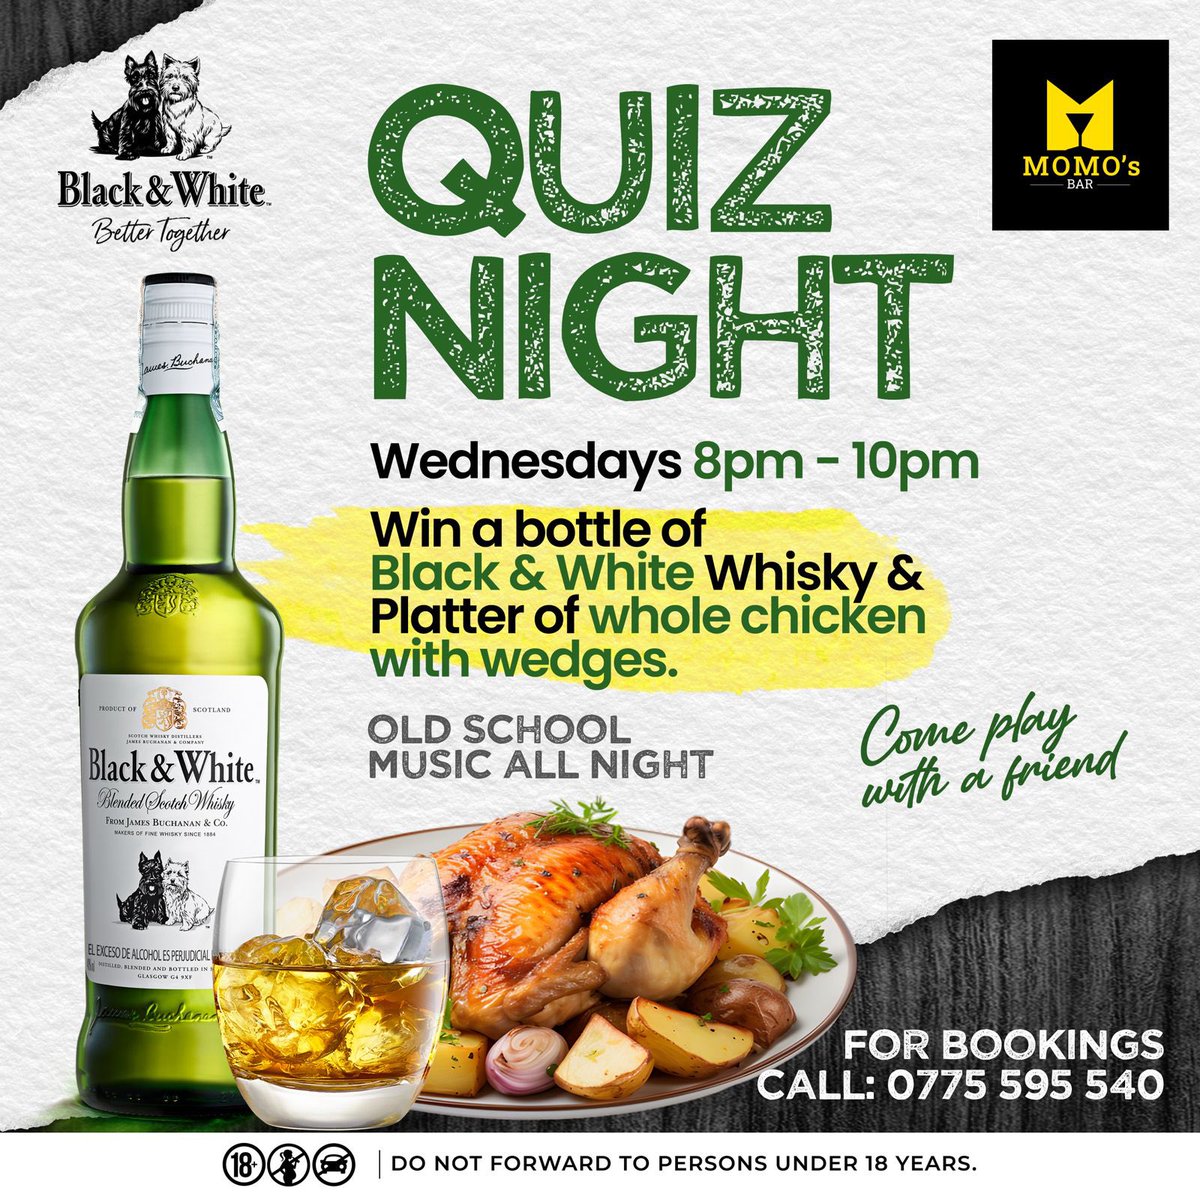 Join the Black & White Whisky Quiz Night! Wednesdays at Momo’s Bar for an evening of fun and trivia. Black & White Blended Whisky, renowned for its exceptional smoothness and mild flavor, awaits you. #BWBettertogether #NextRadioUg